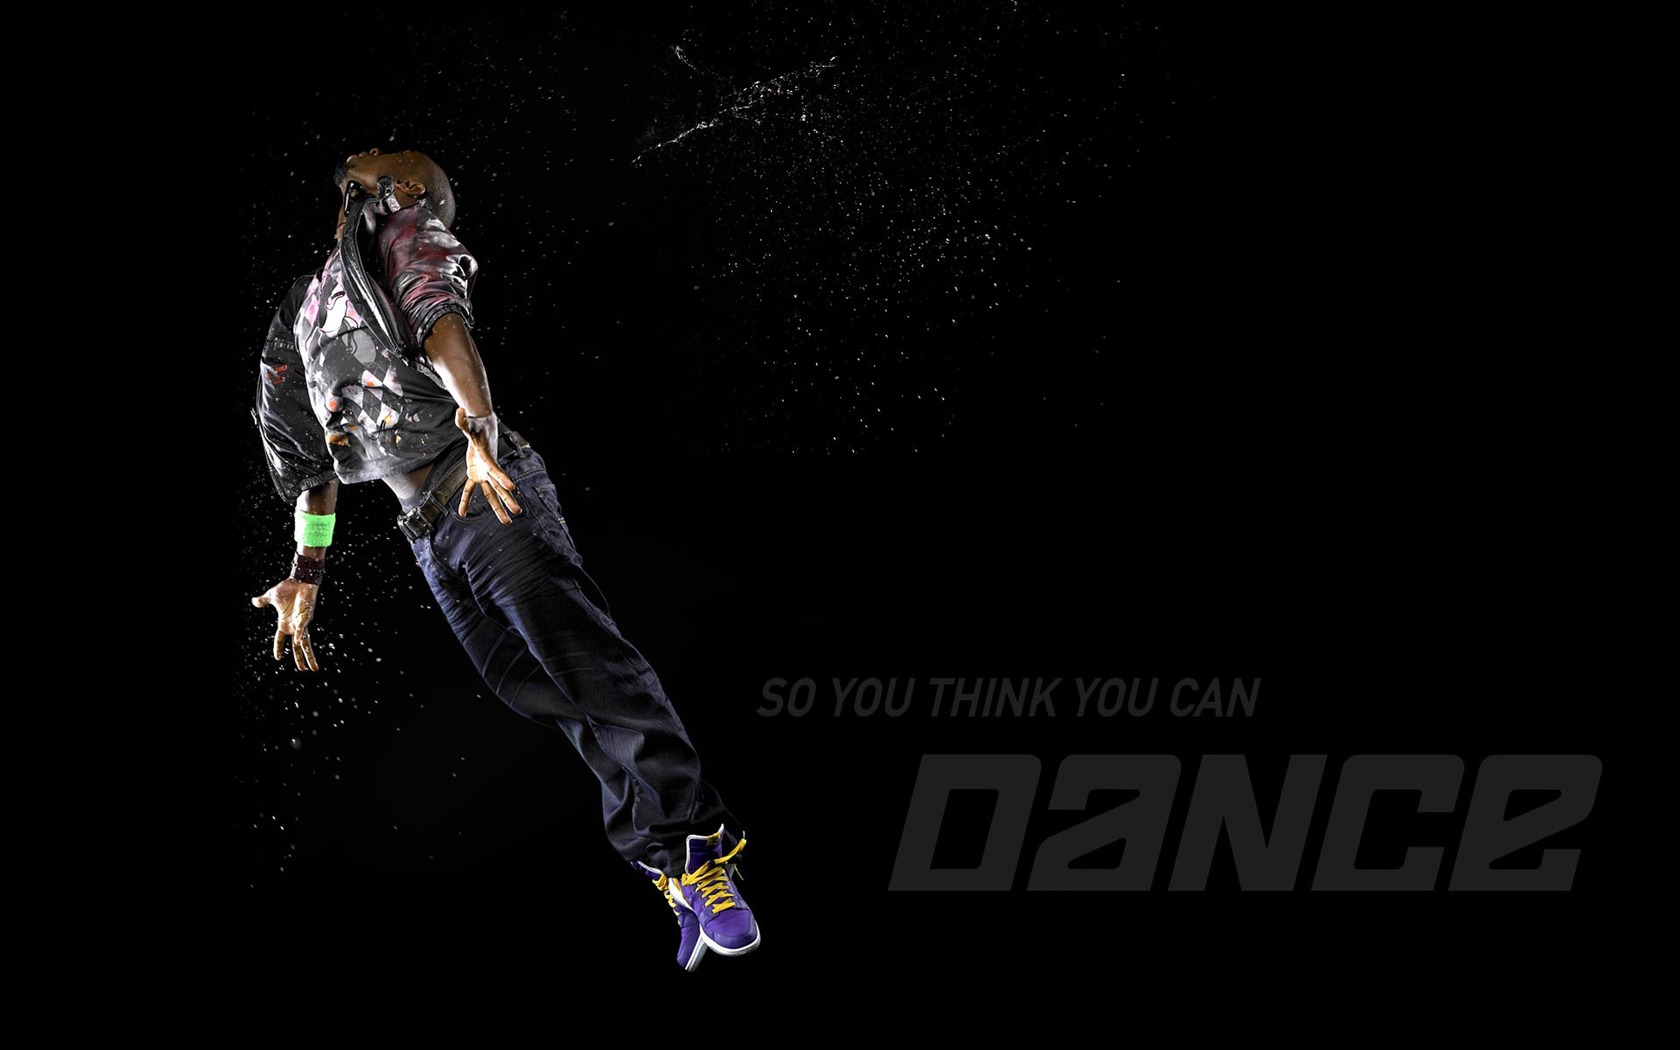 So You Think You Can Dance Wallpaper (1) #10 - 1680x1050